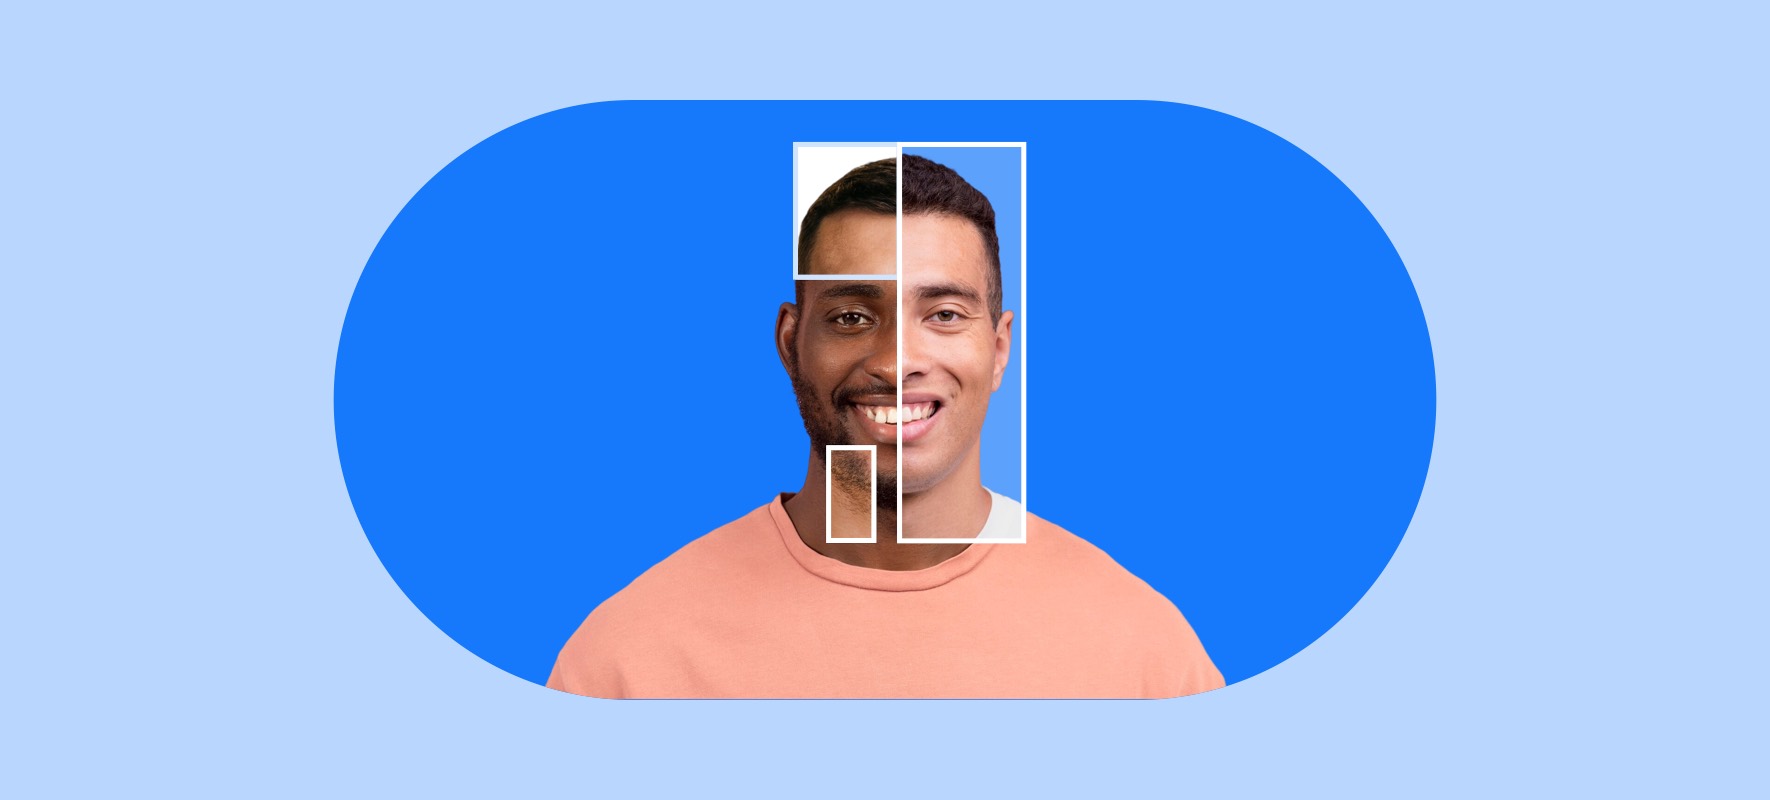 A man with a smiling face on a blue background. The face is highlighted with different shades- representing the concept of ‘decoding deception